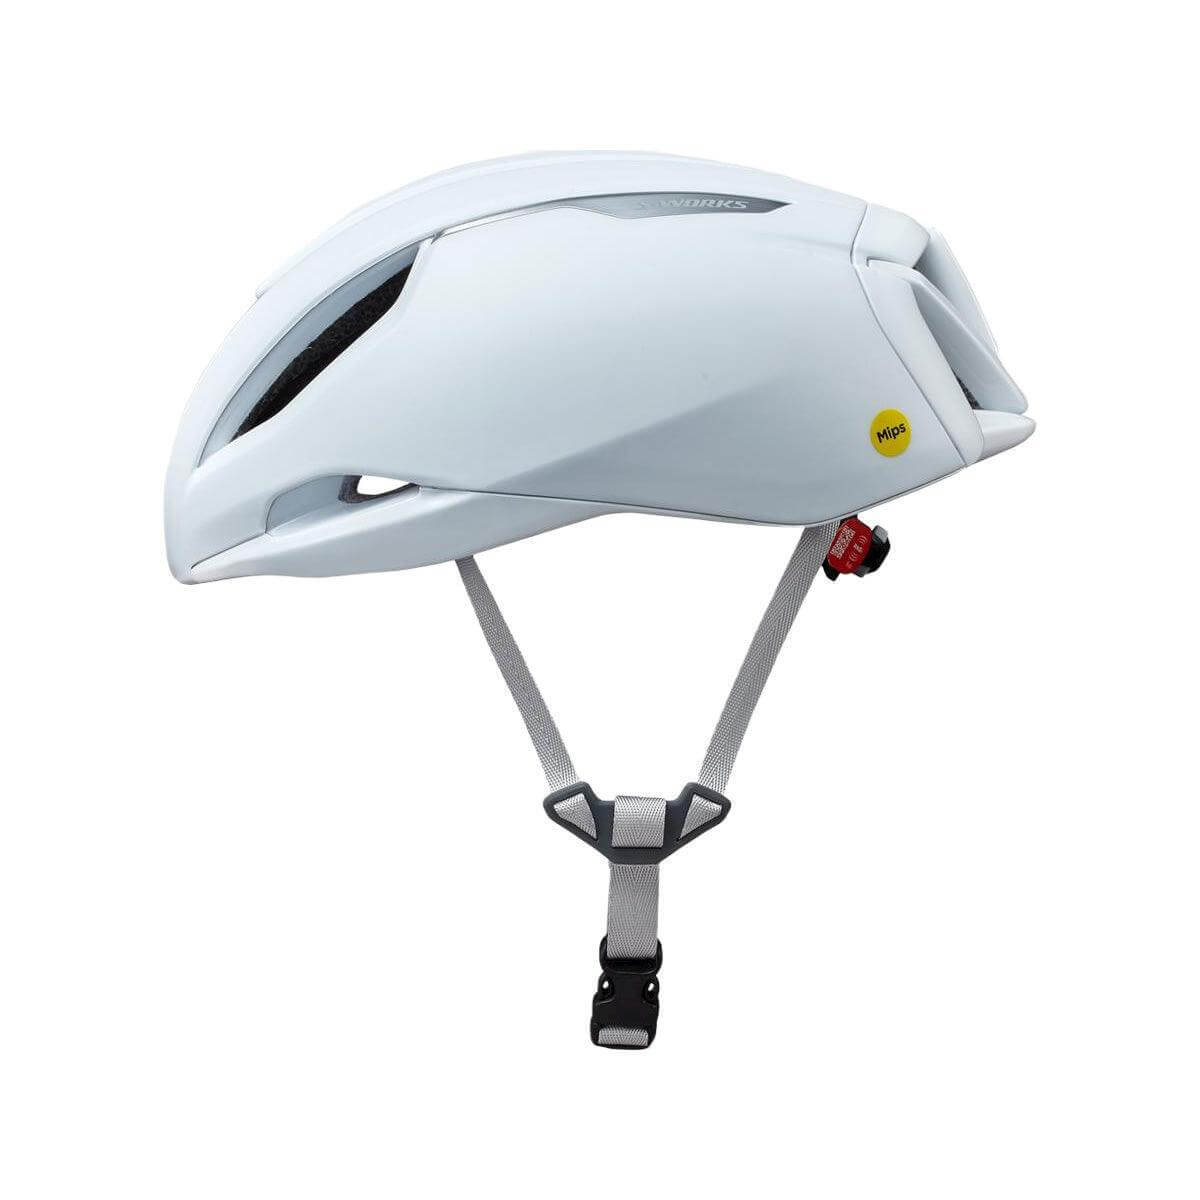 S-Works Evade Helmet  Strictly Cycling Collective - Strictly Cycling  Collective